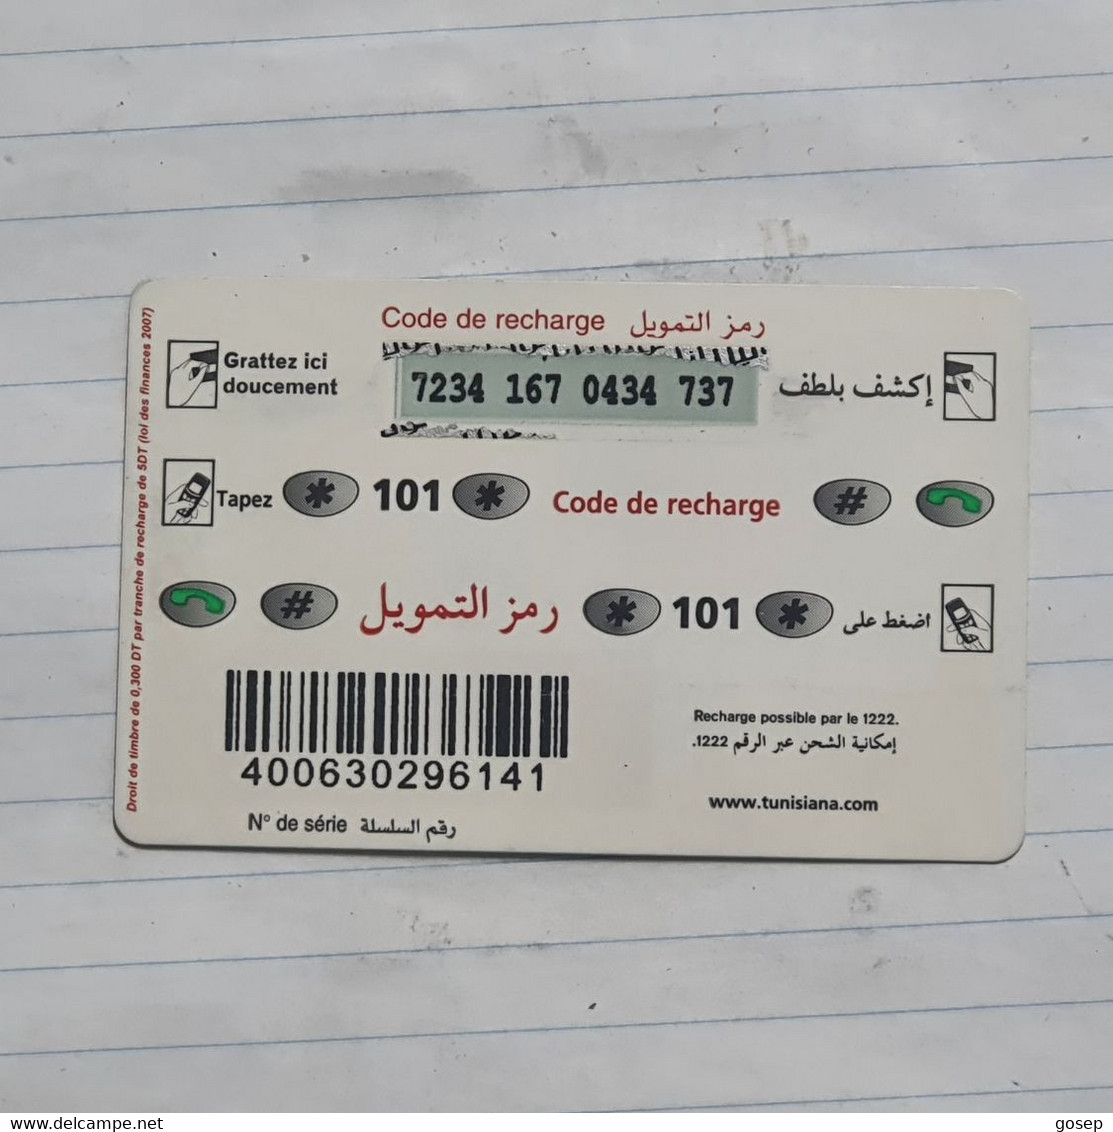 TUNISIA-(TUN-REF-TUN-21C)-CHAMPIONS-(123)-(7234-167-0434-737)-(look From Out Side Card Barcode)-used Card - Tunisia